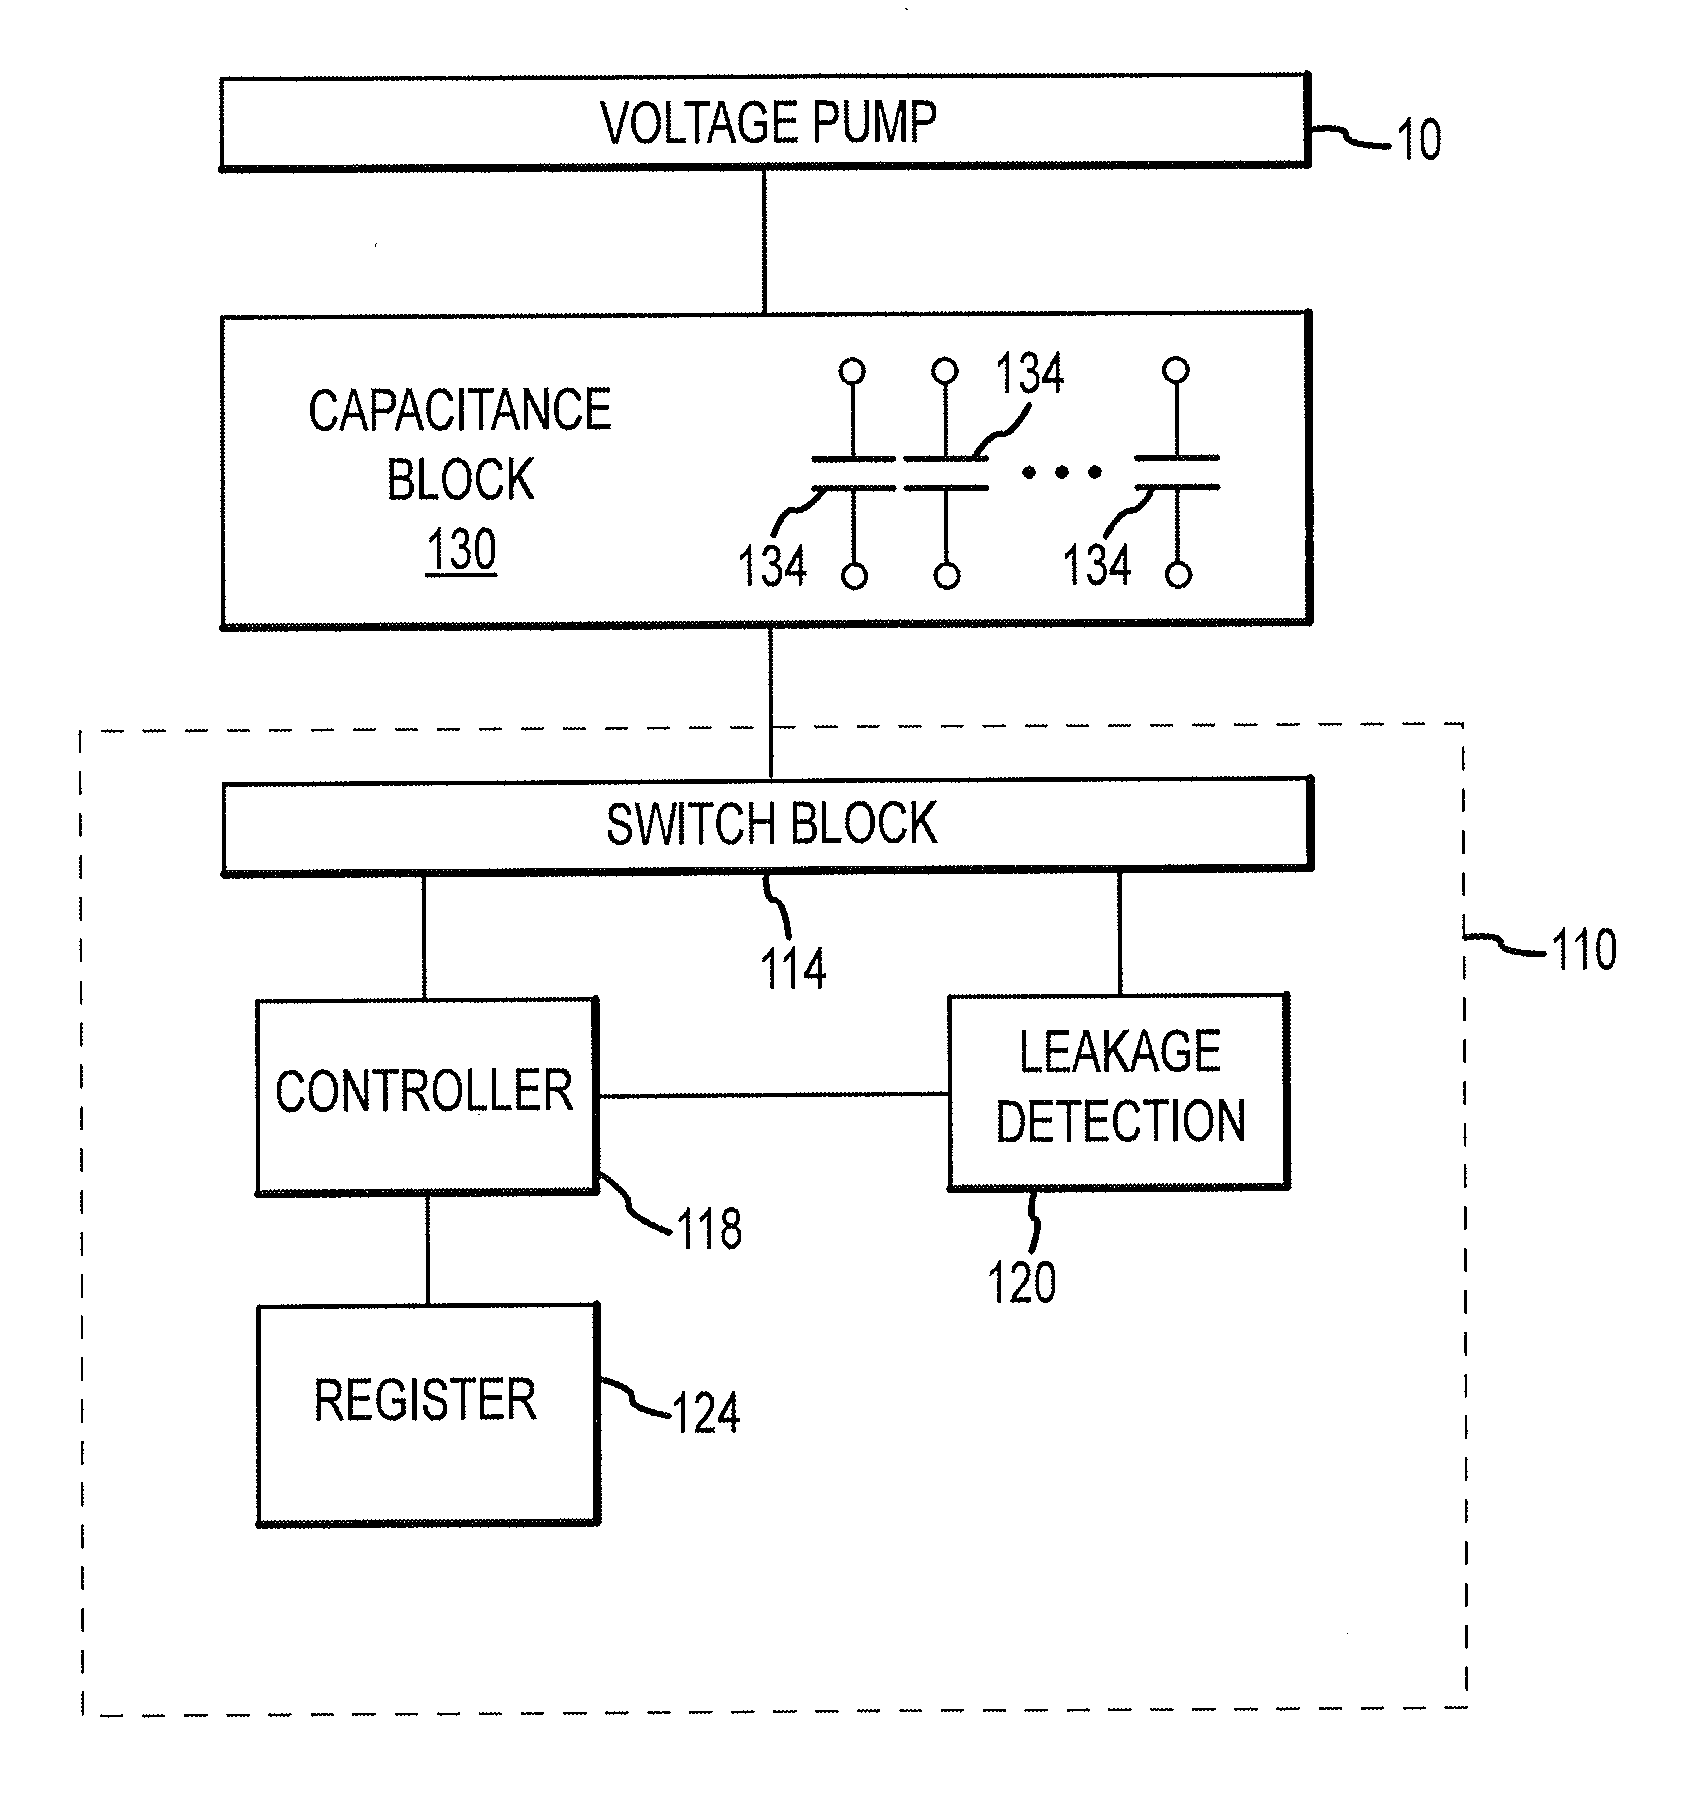 Capacitance evaluation apparatuses and methods